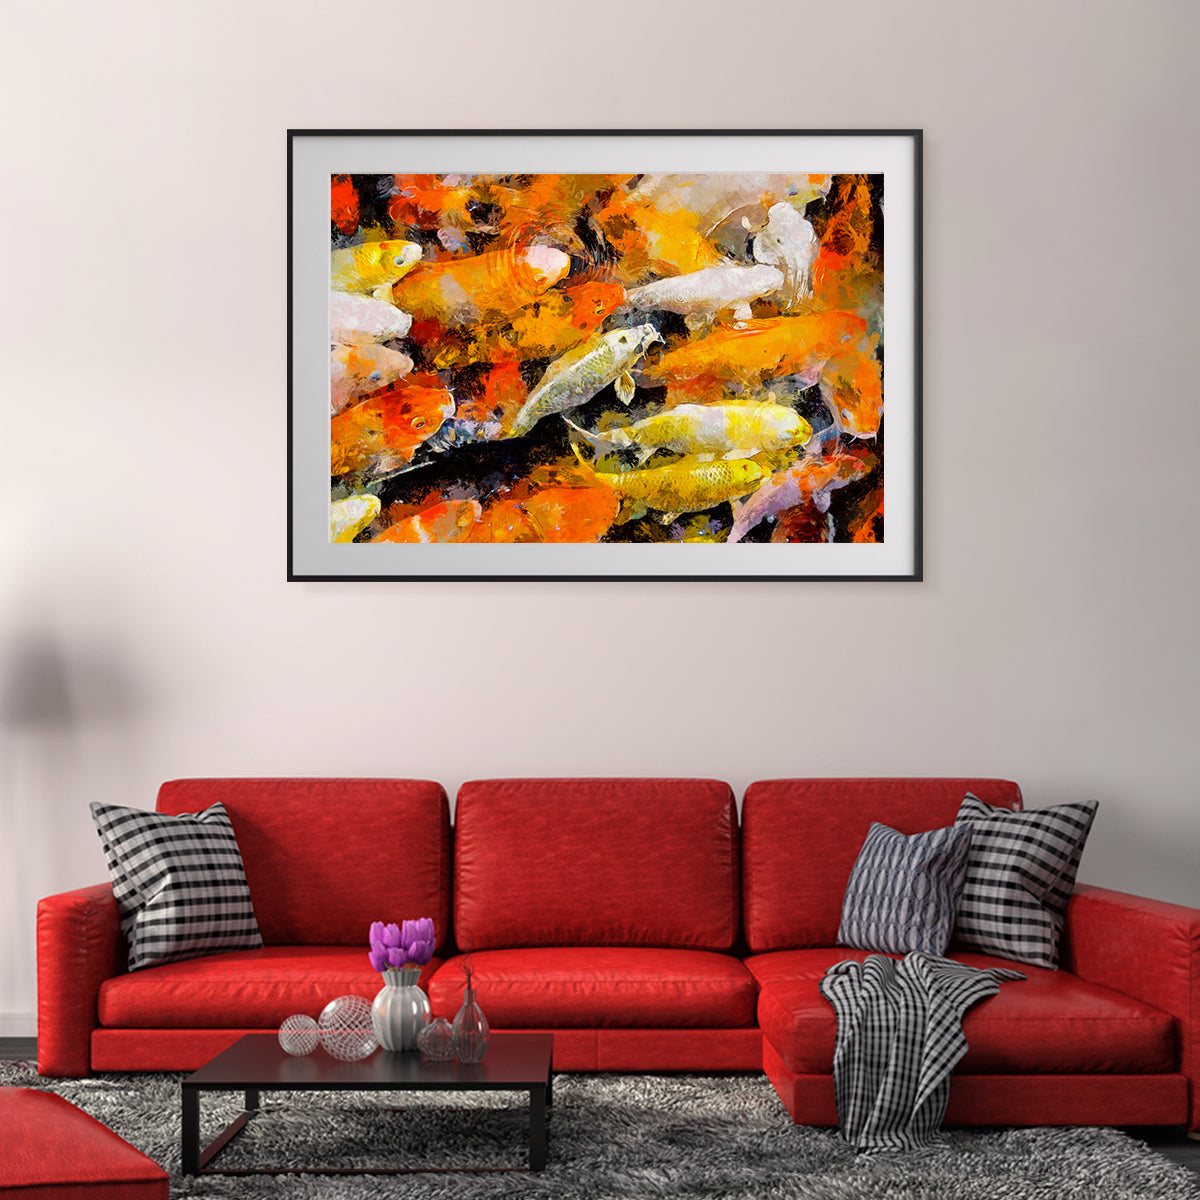 Abstract Japanese Koi Fishes Posters Modern Interior Decoration-Horizontal Posters NOT FRAMED-CetArt-10″x8″ inches-CetArt